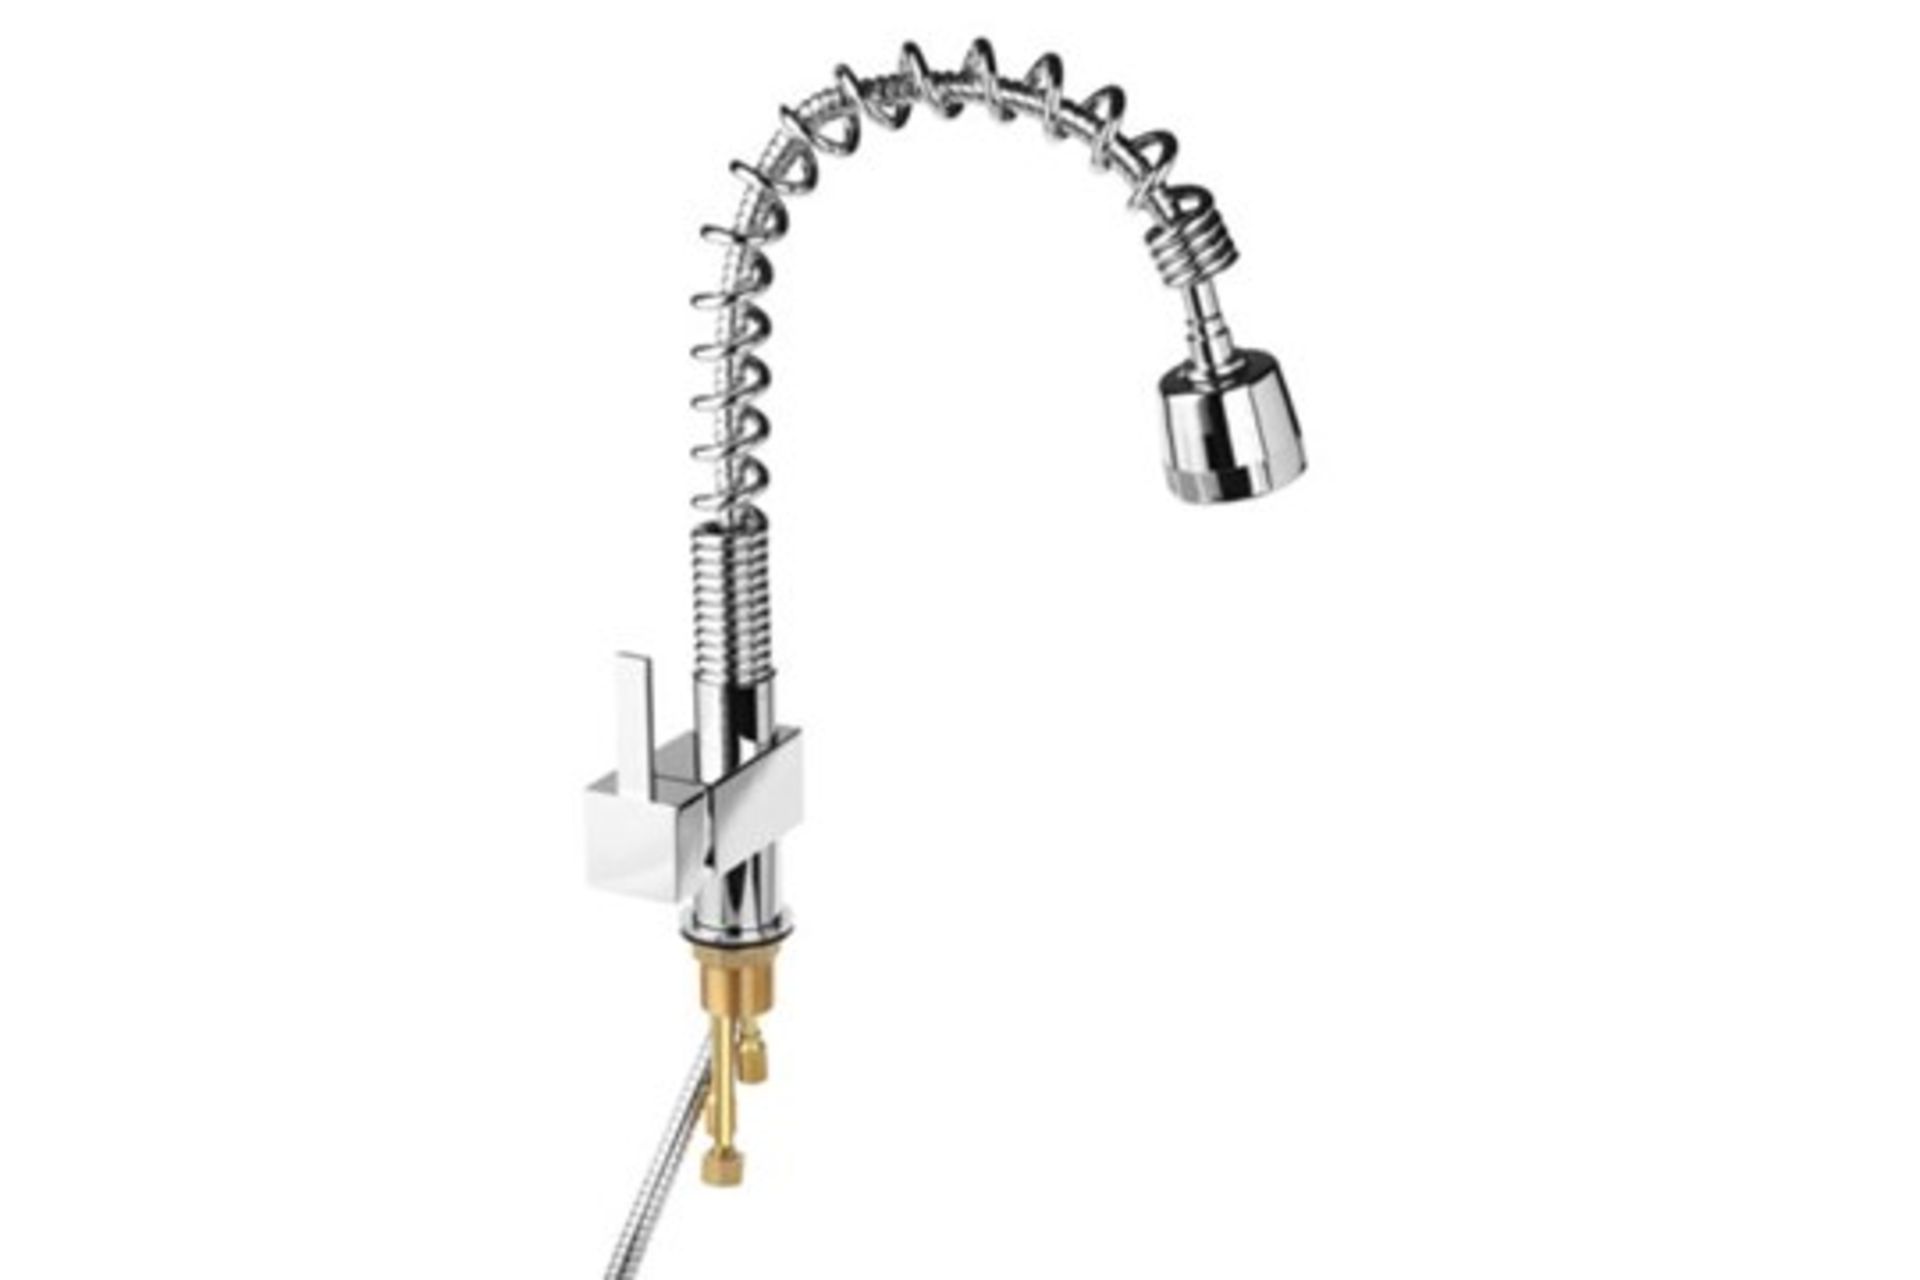 (CS212) Maddie Brushed Chrome Monobloc Kitchen Tap Swivel Pull Out Spray Mixer. RRP £219.99.